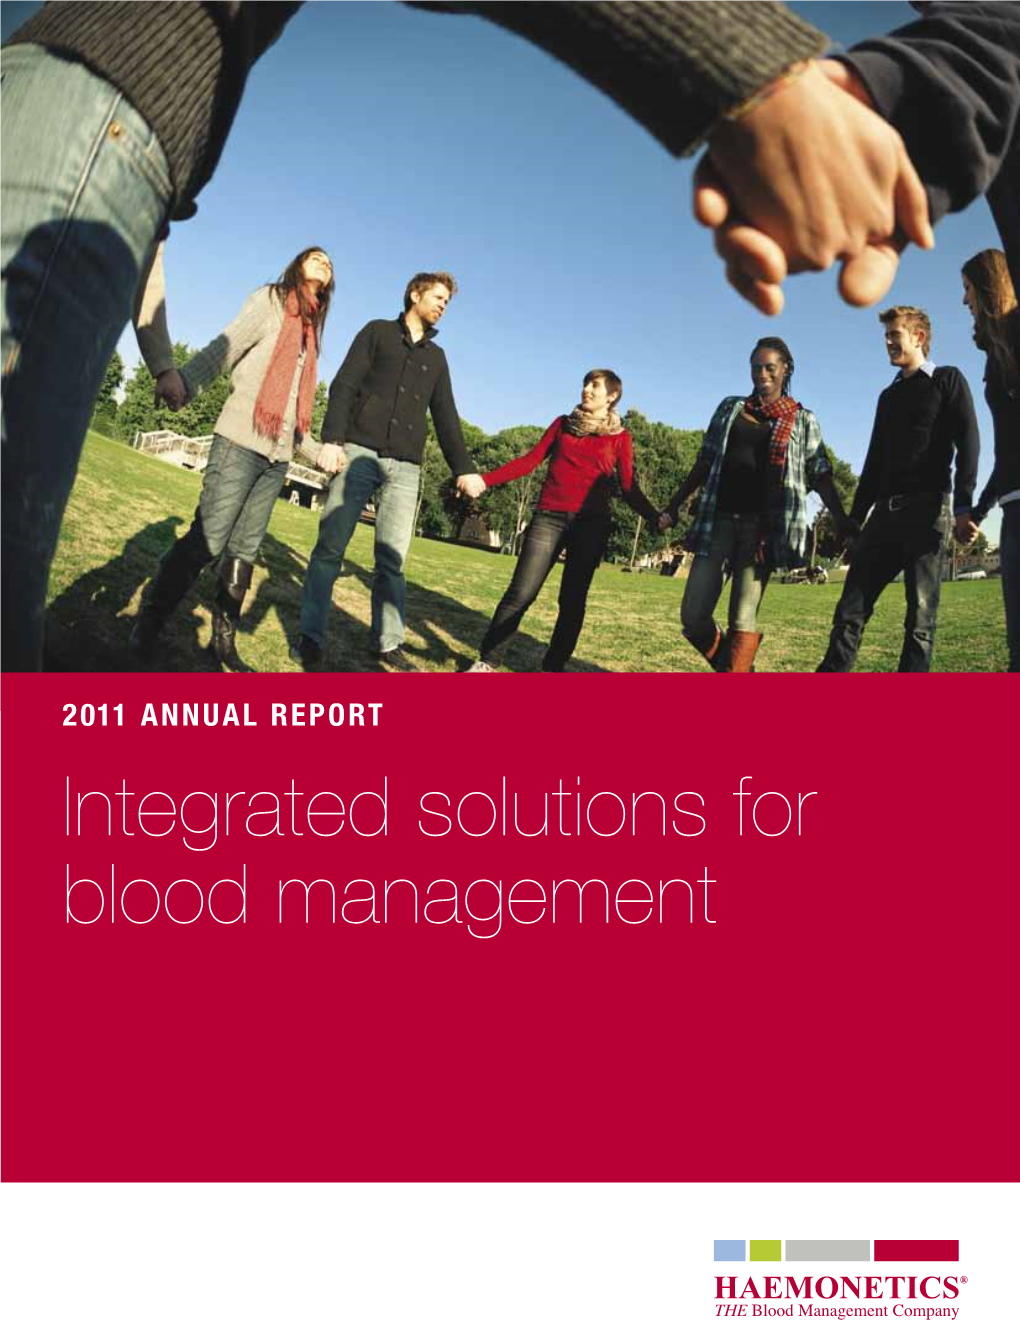 Integrated Solutions for Blood Management Consumable Sales Create Product Line Diversity Geographic Diversity Recurring Revenue Stream